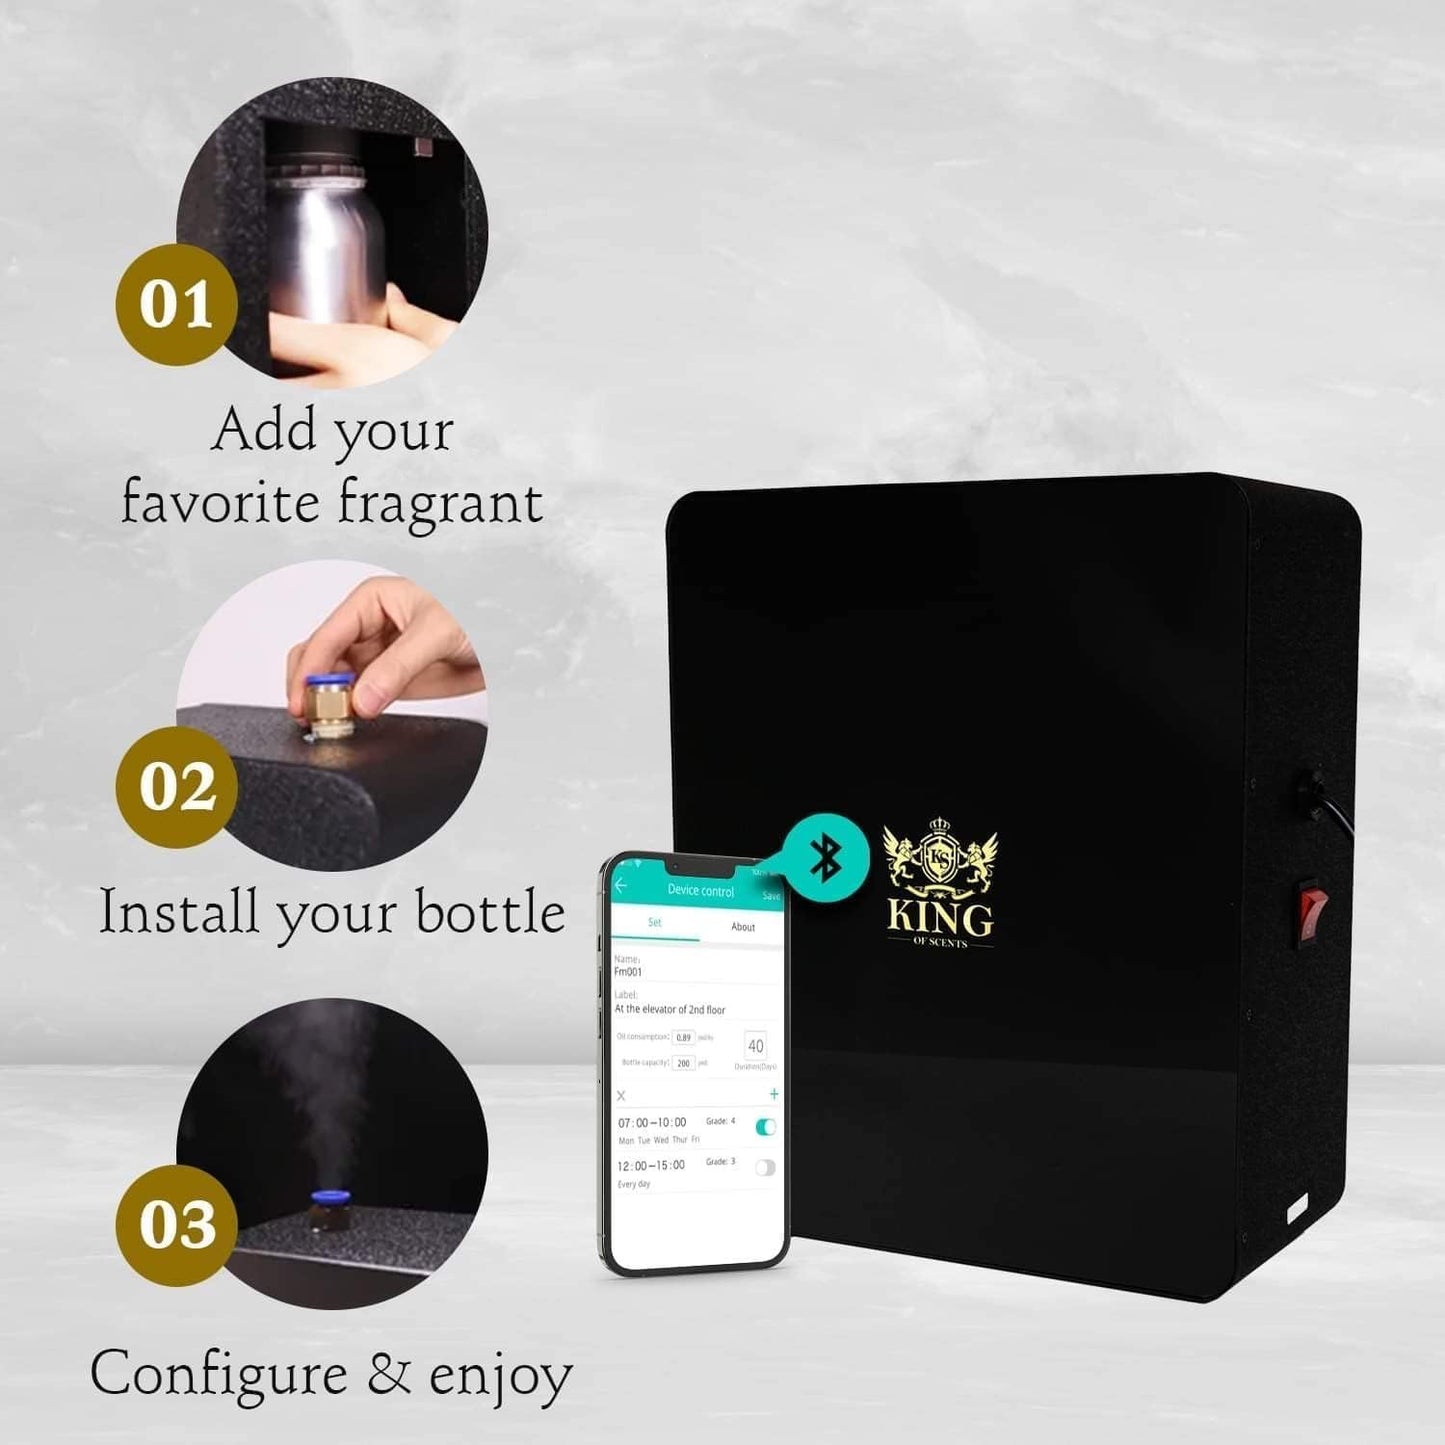 King Of Scents Essential Oil Diffuser, Nebulizing Diffusion System, Heat-Free System for Home or Commercial Use, Covers up to 5,000 Square feet !